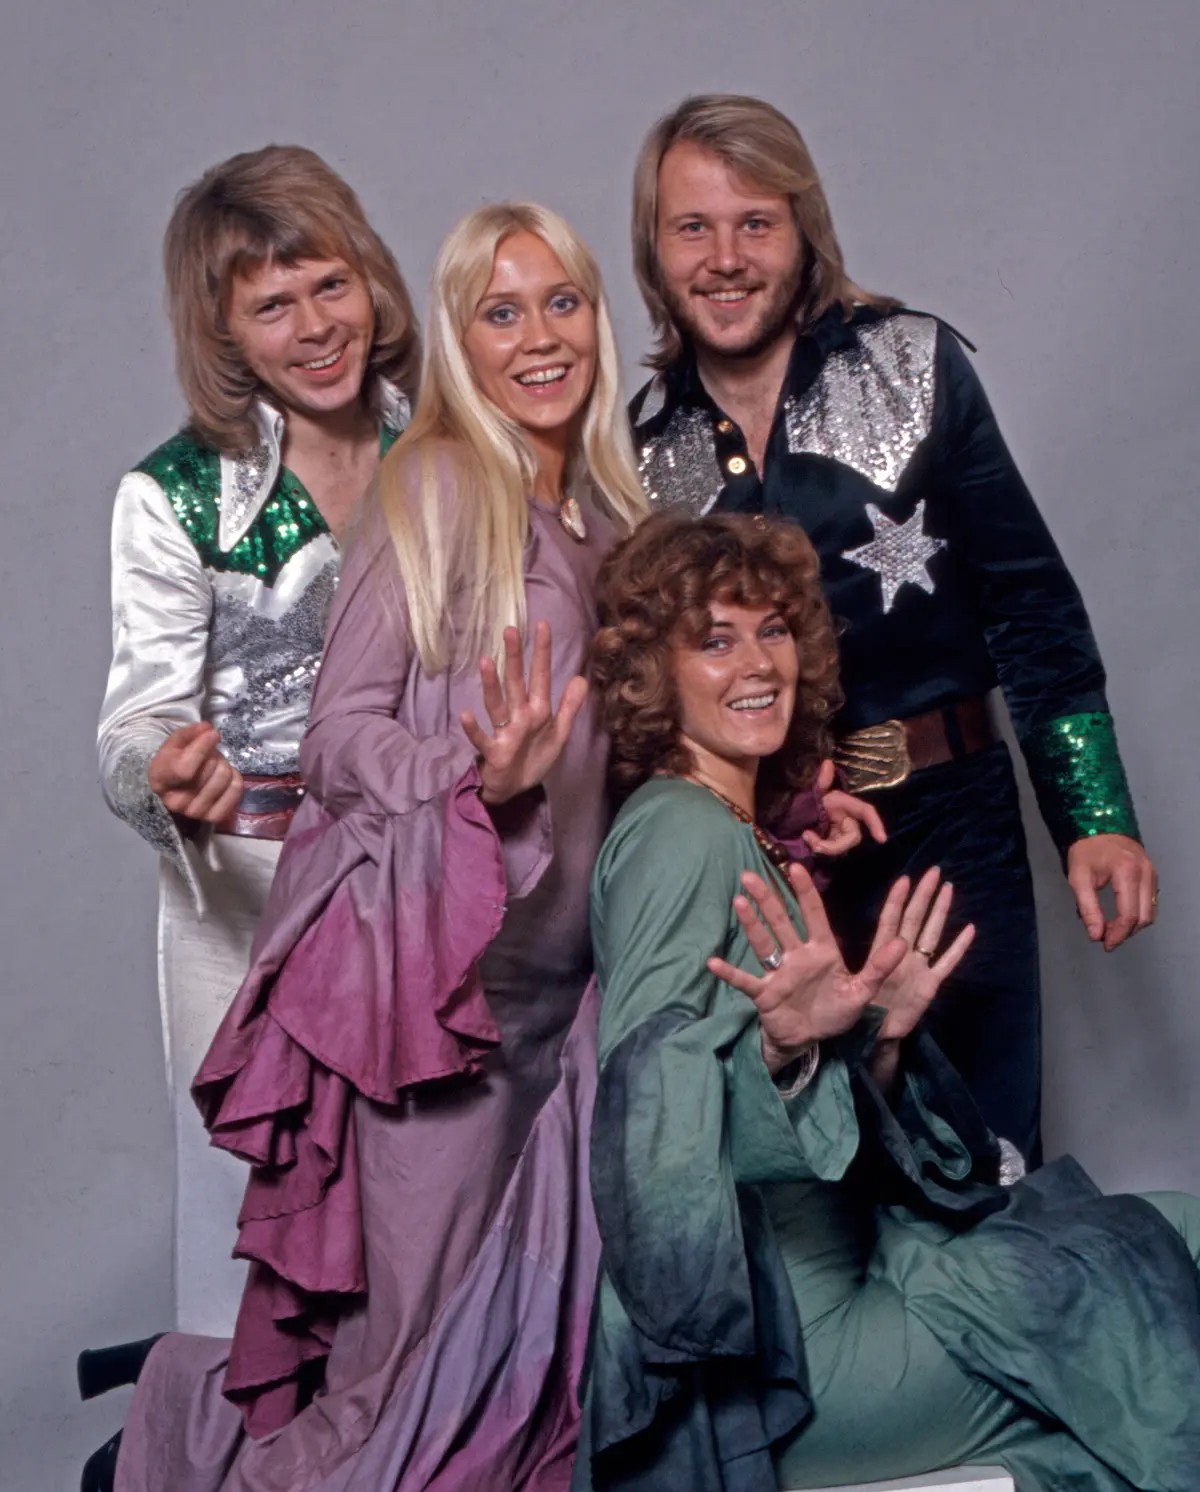 The Power of Music: cultural influence throughout the decades - ABBA